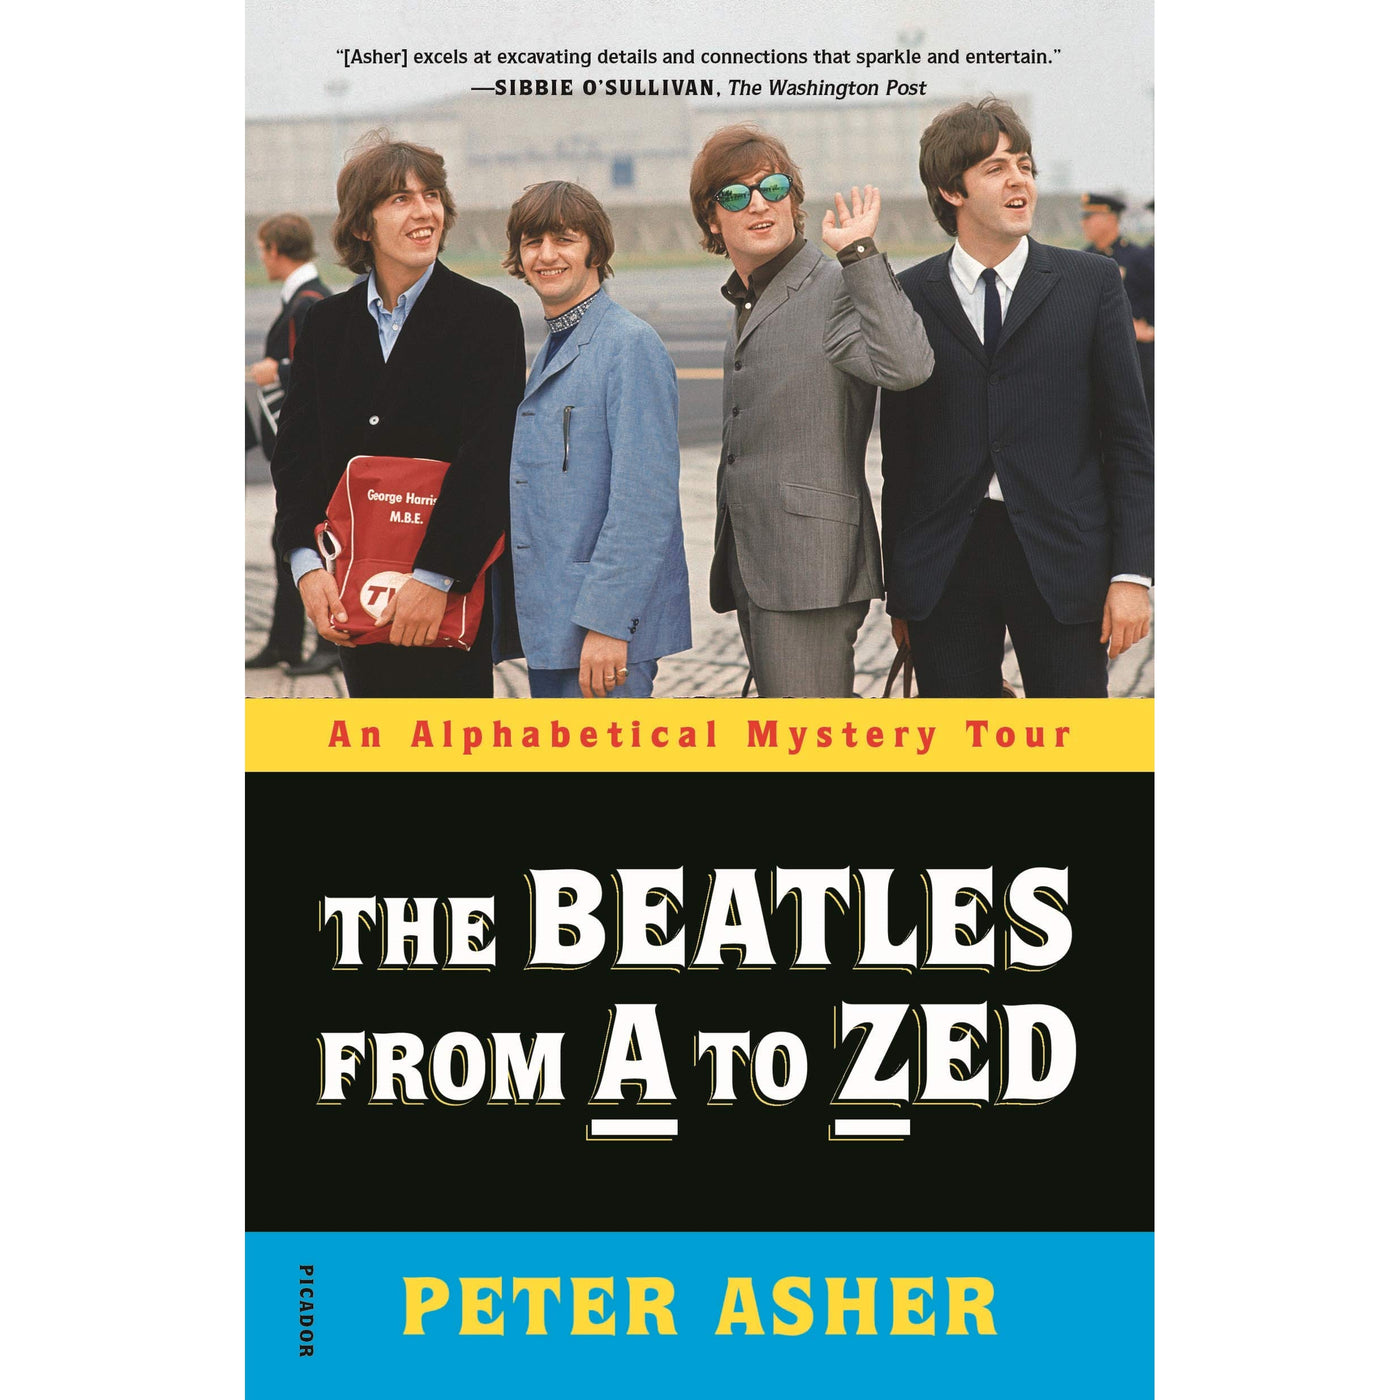 The Beatles From A To Zed